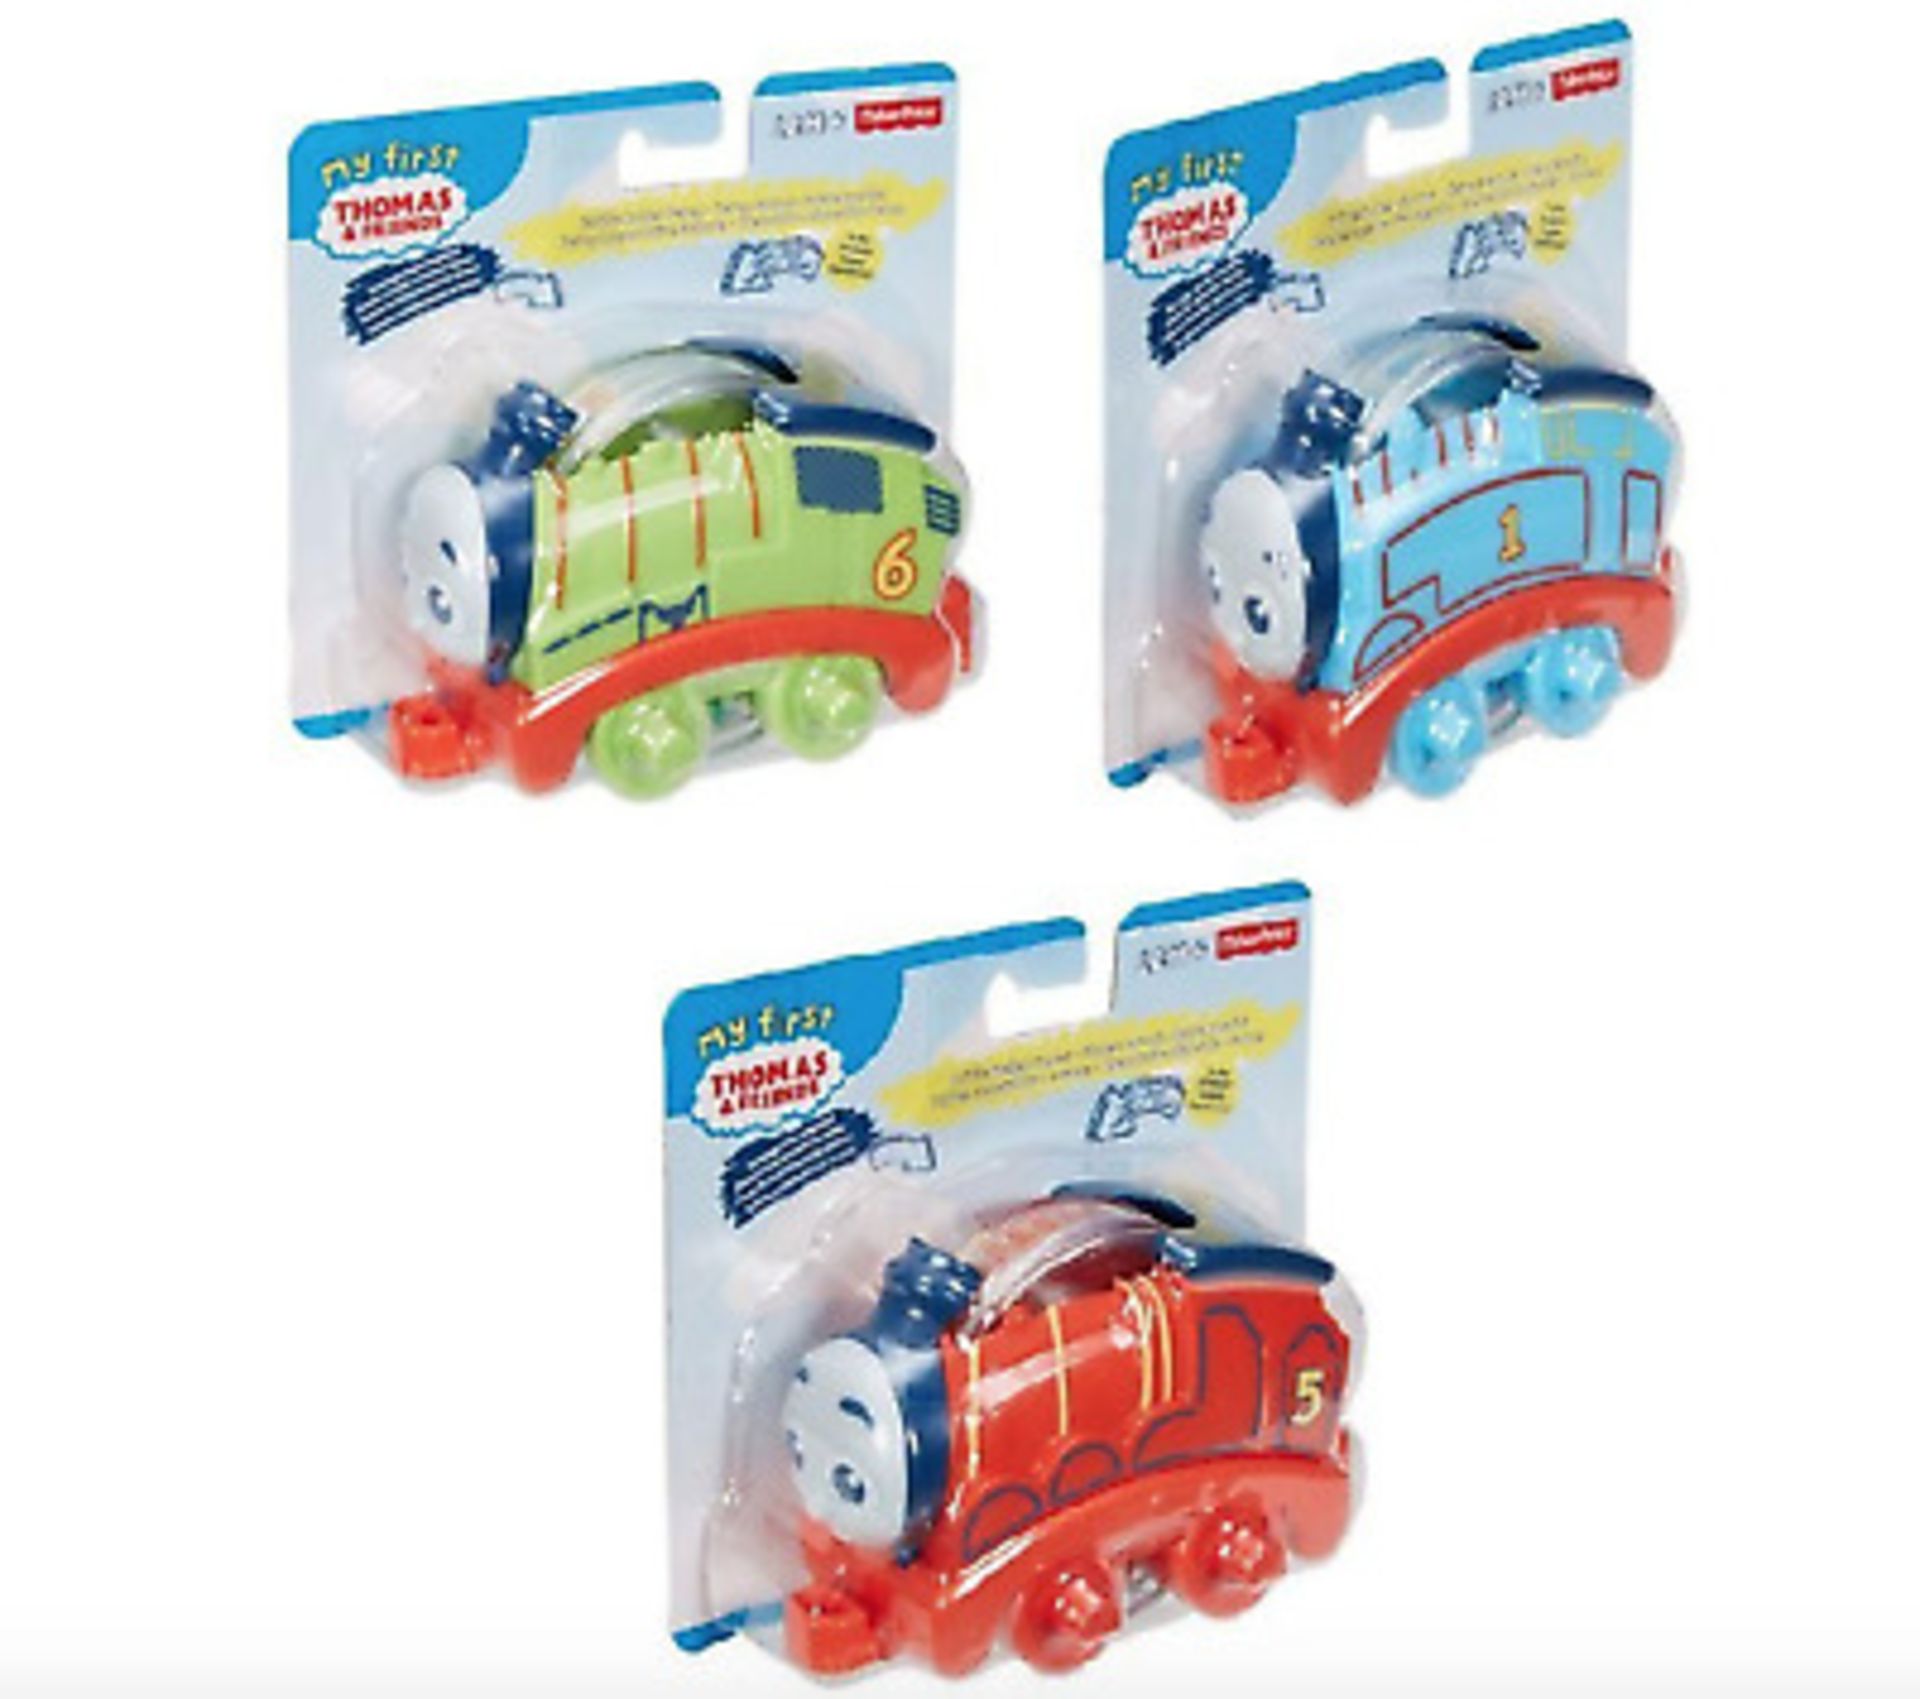 10pcs Thomas rattle roller toy - assorted colours